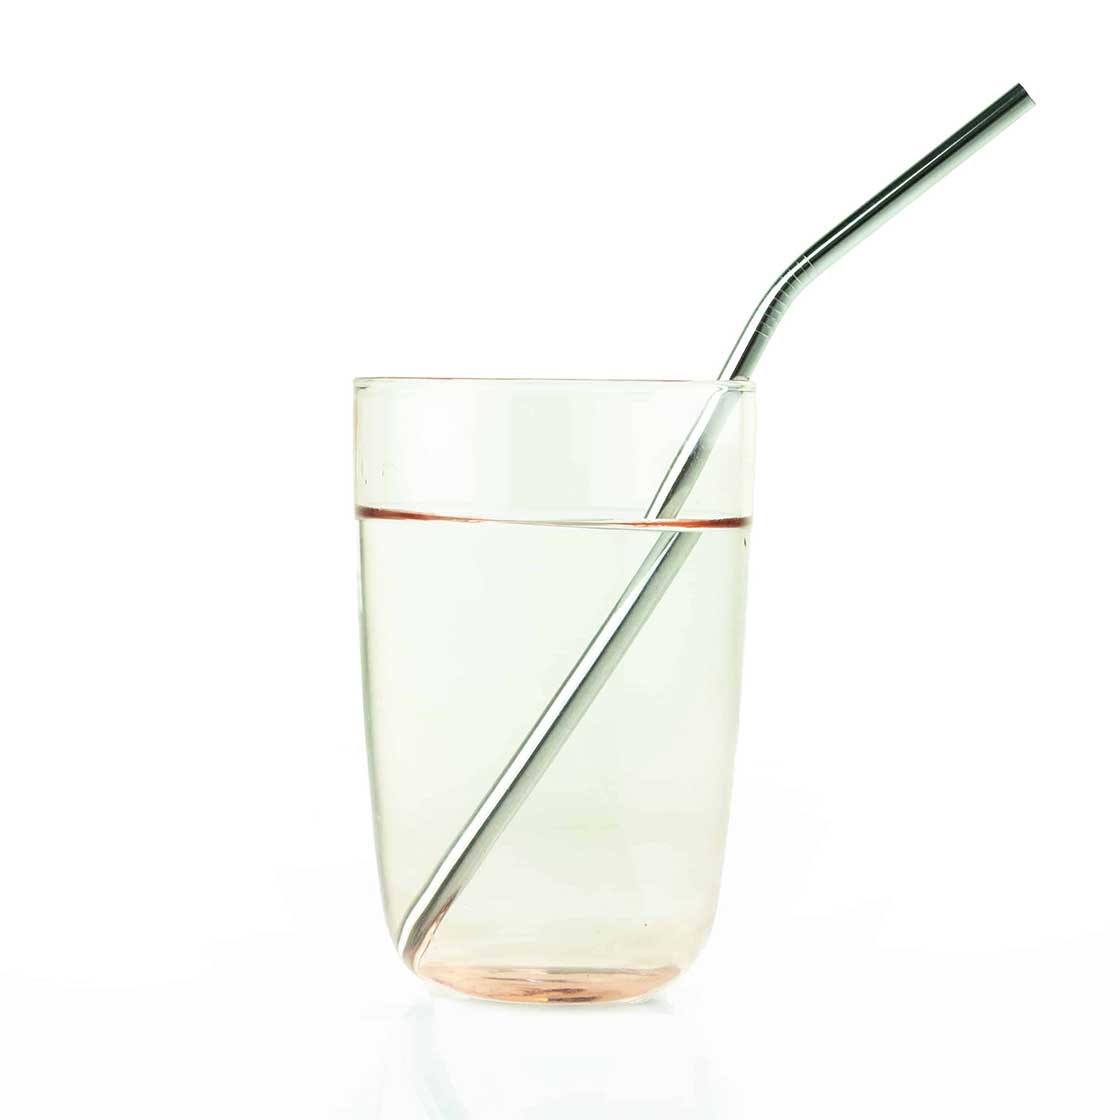 Straw, Stainless Steel (Angled)